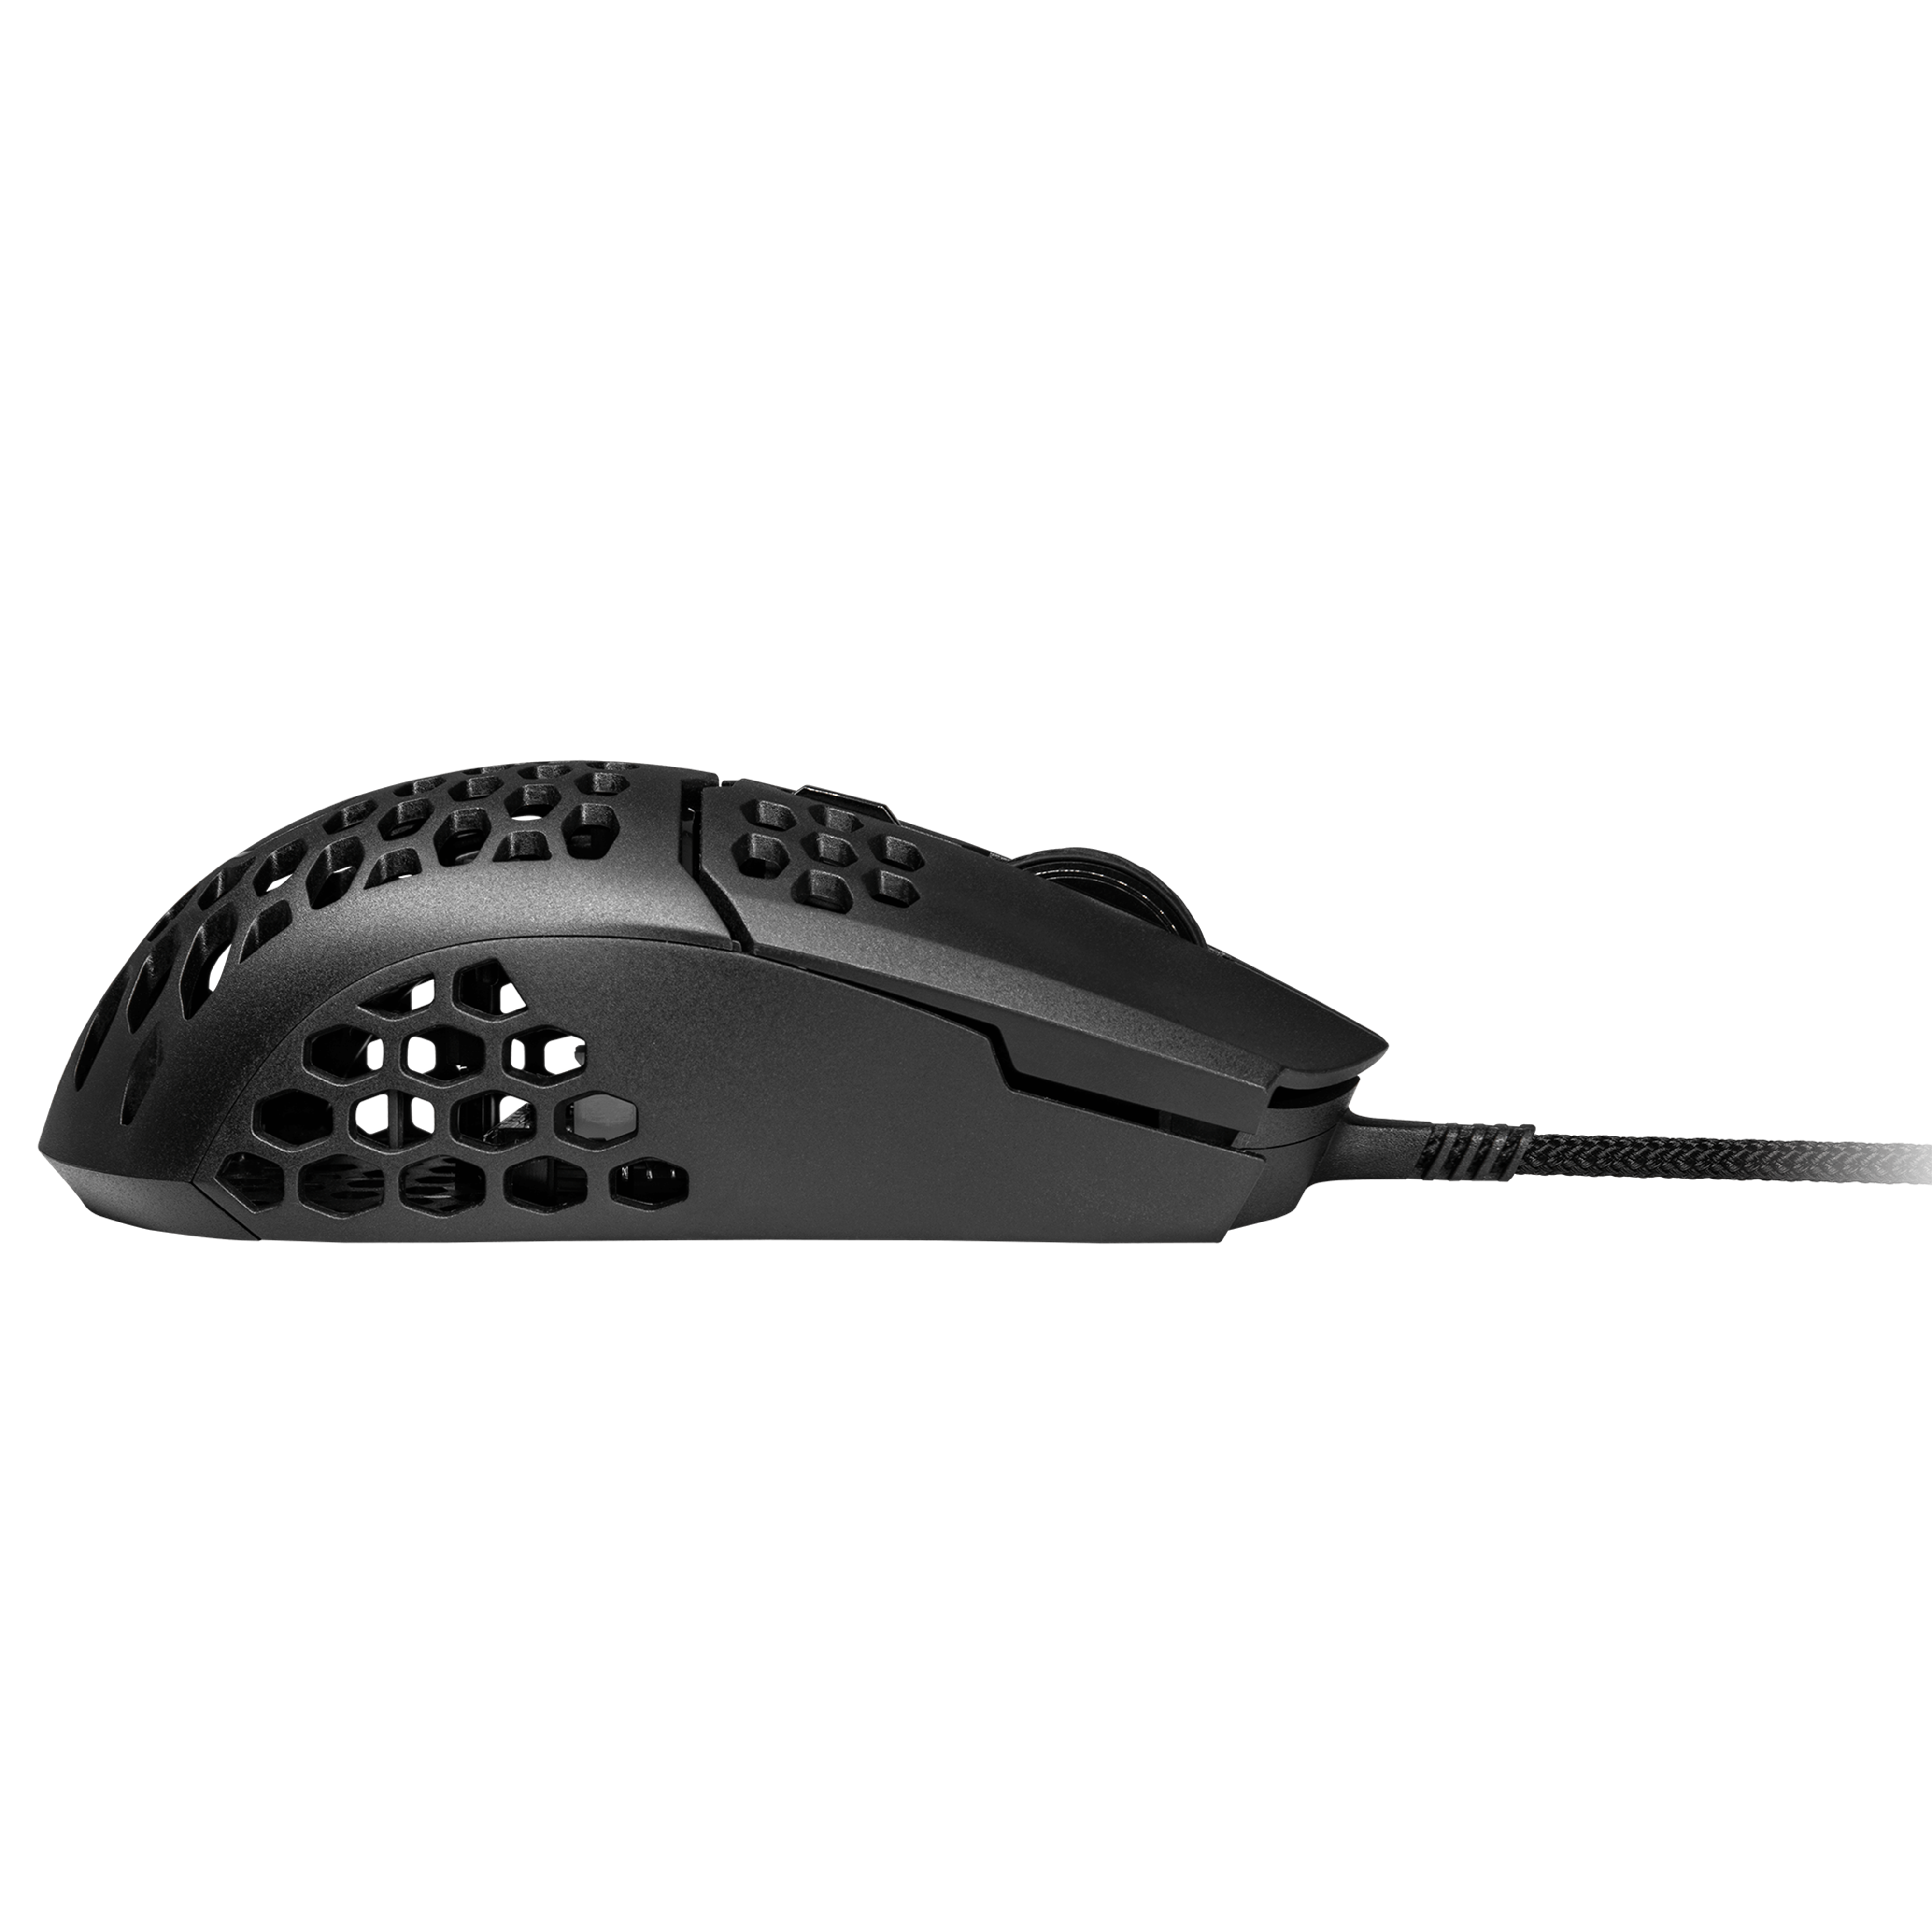 Nab this crazy fast Cooler Master gaming mouse for just $18